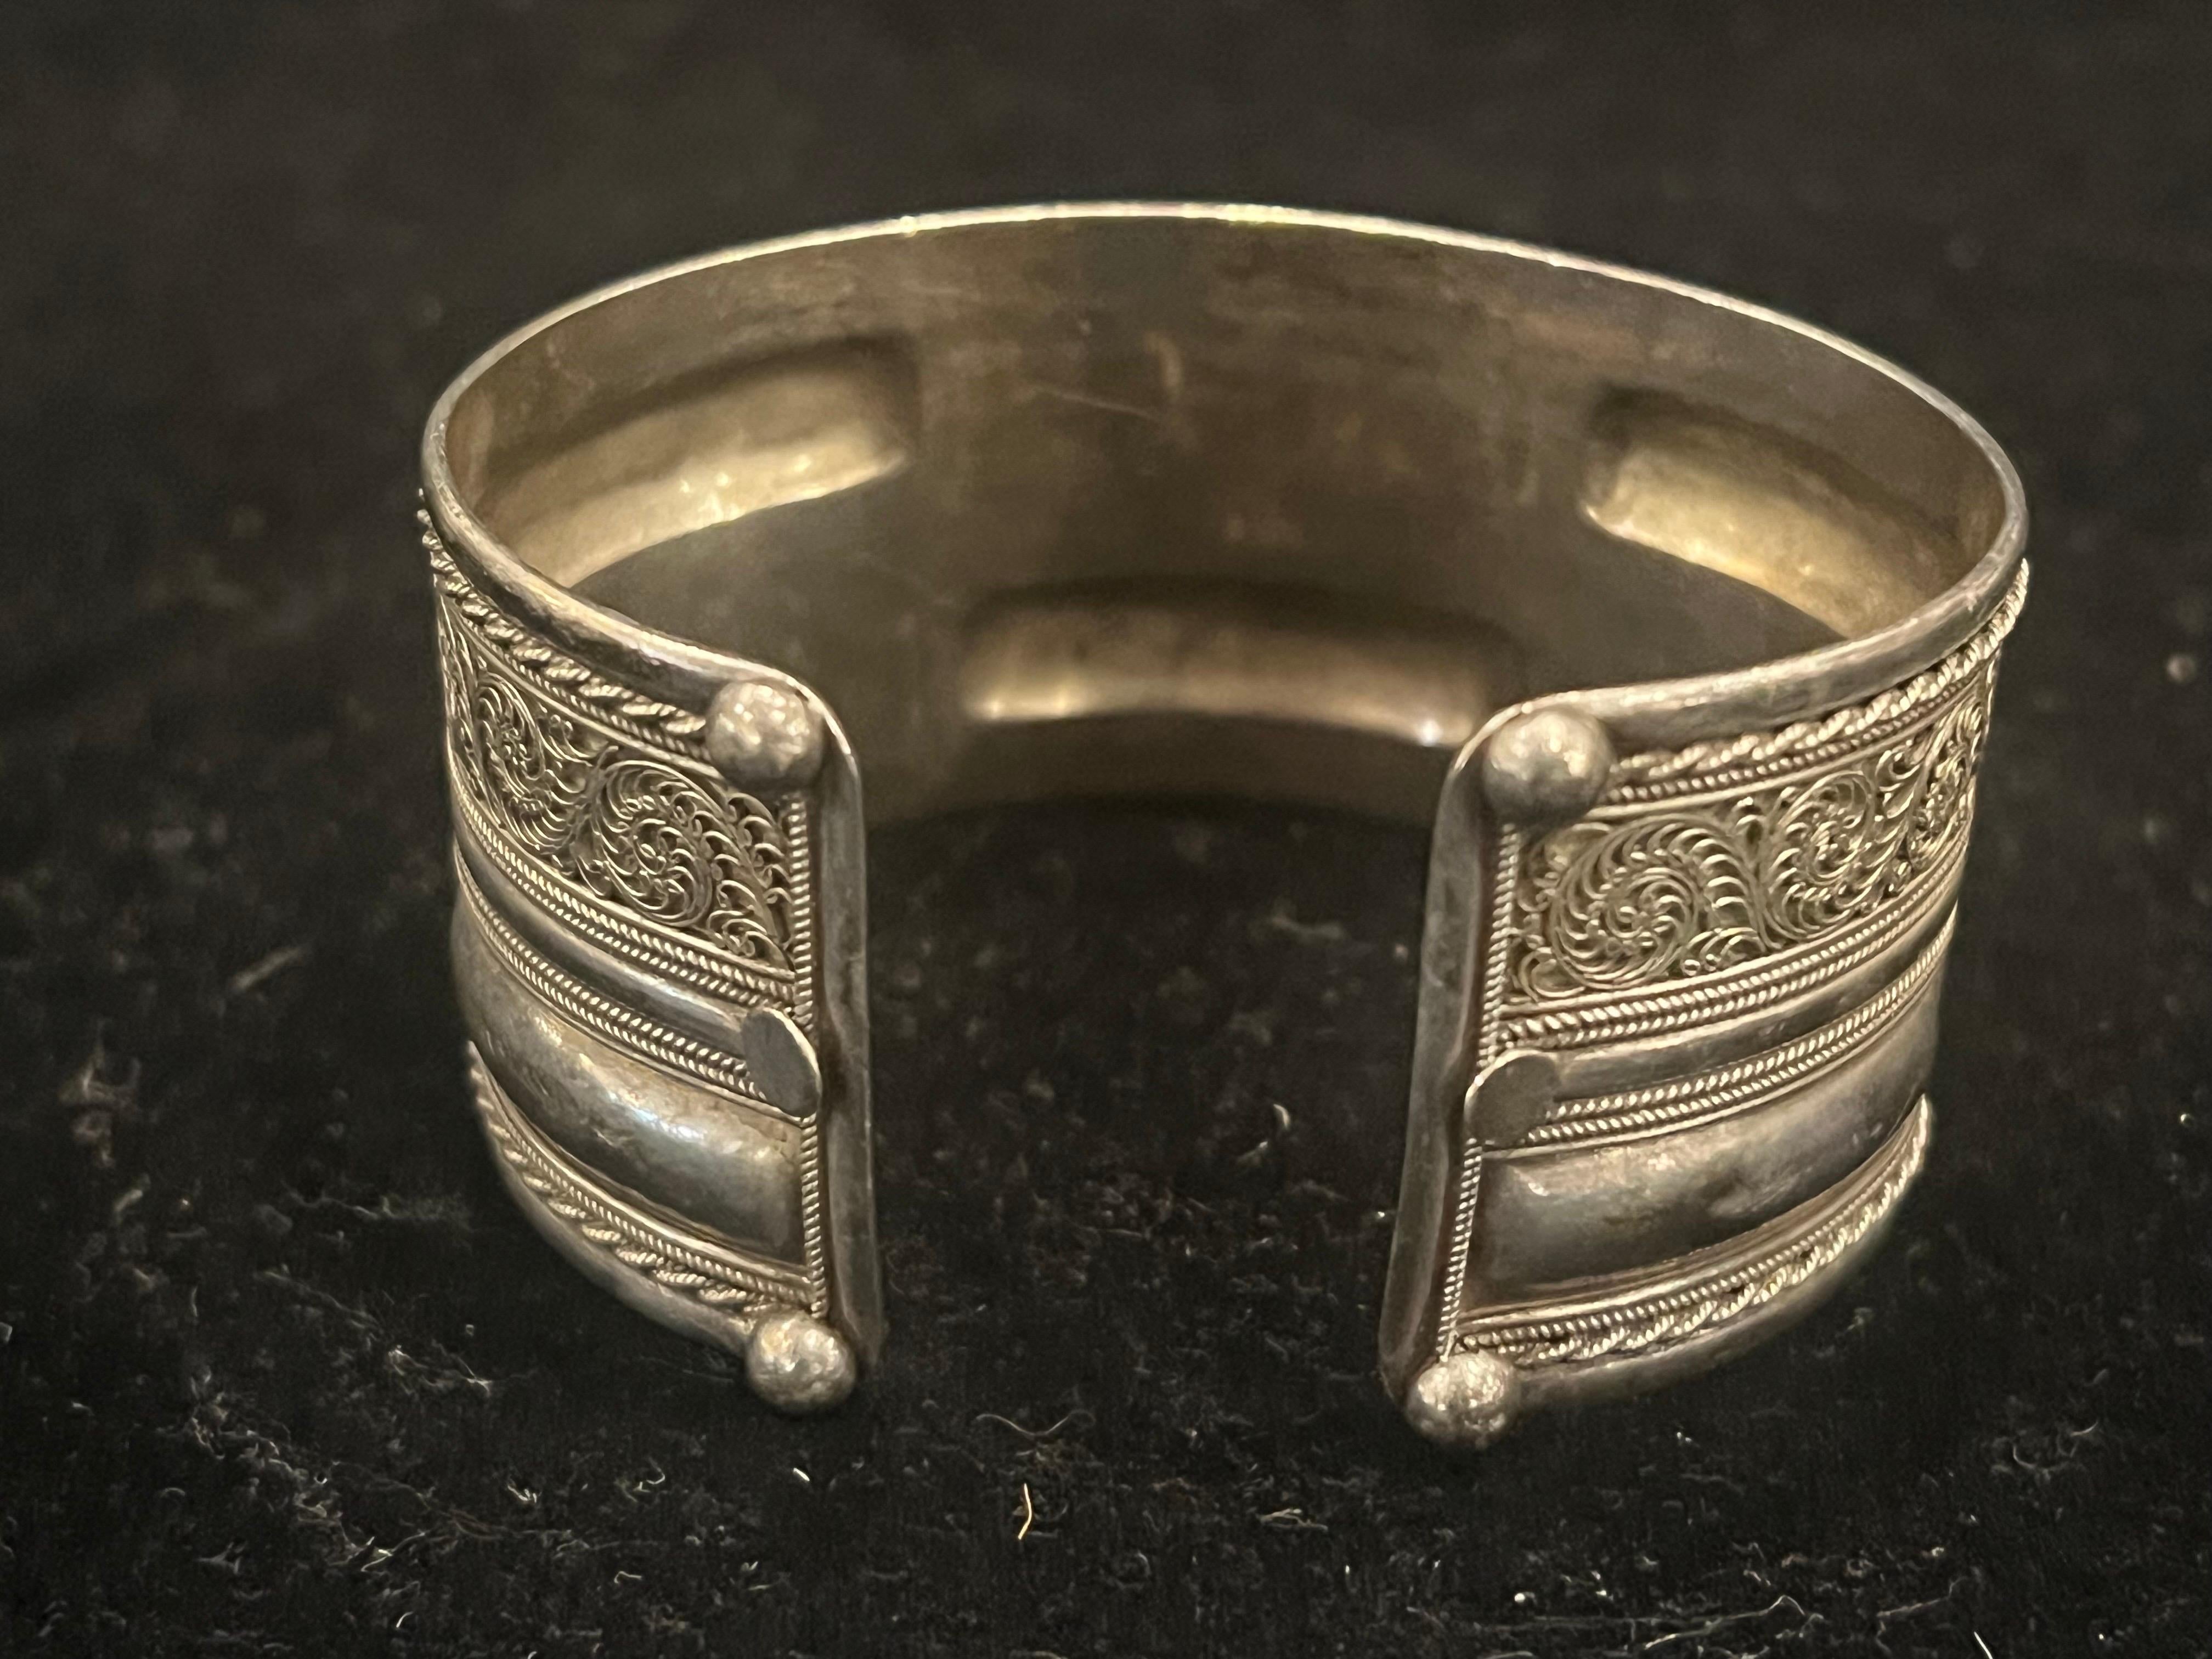 Wonderful Victorian-style bracelet cuff. All in sterling silver haute couture - iconic. This piece is not only a ready-to-wear creation but also the most dynamic piece of modern sculpture. This piece is stamped and is incredibly chic. Museum quality.